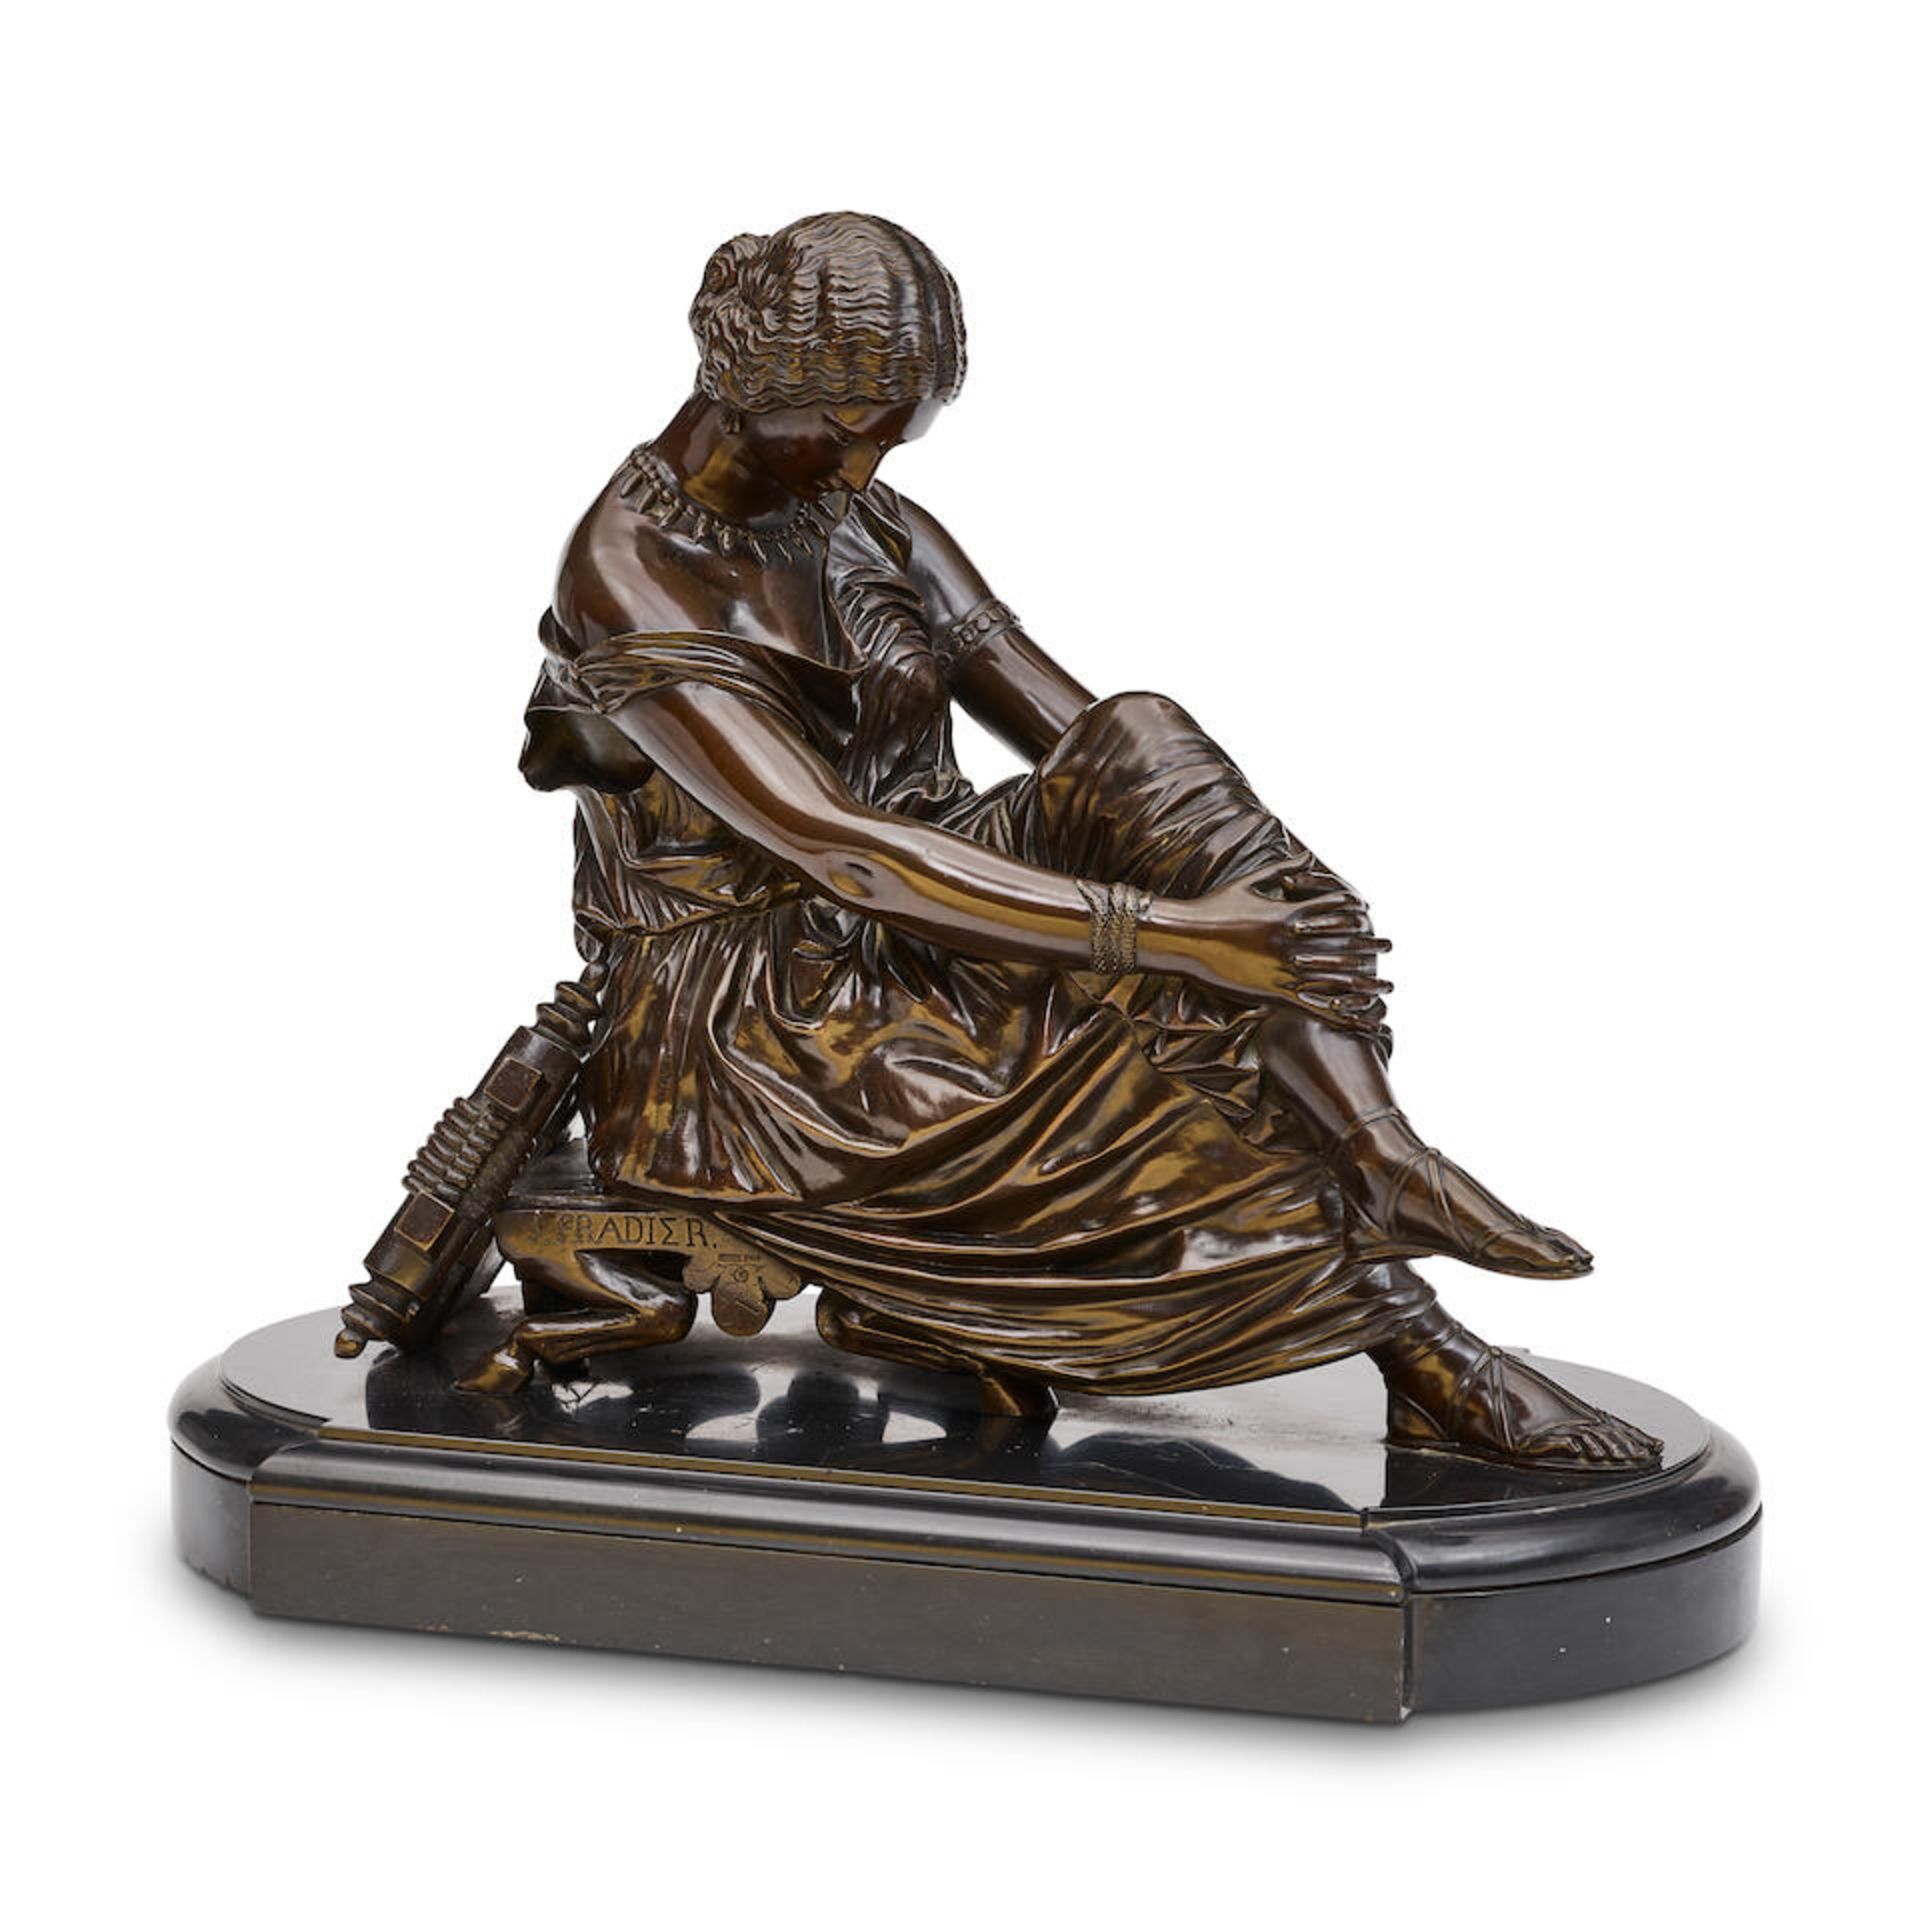 A PATINATED BRONZE FIGURE OF A SEATED WOMAN WITH A LUTEAfter Jean Jacques Pradier, 20th century